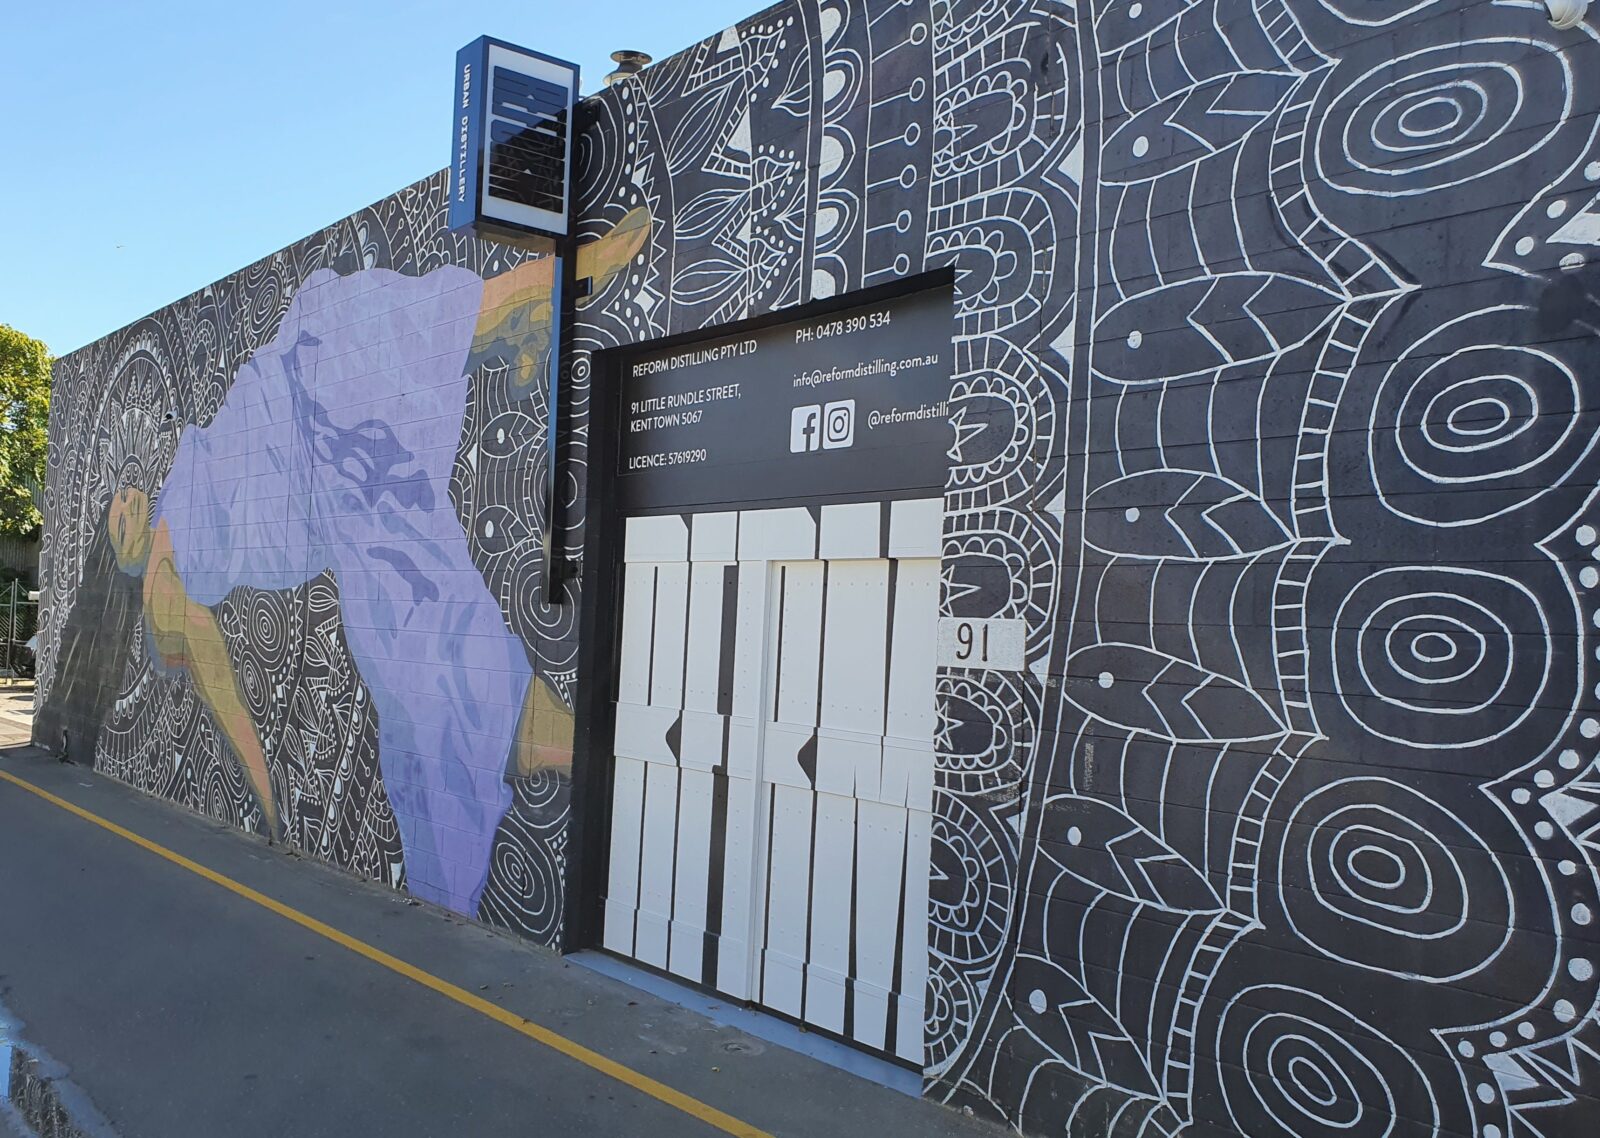 External view of Reform Distilling including the street art on the building frontage